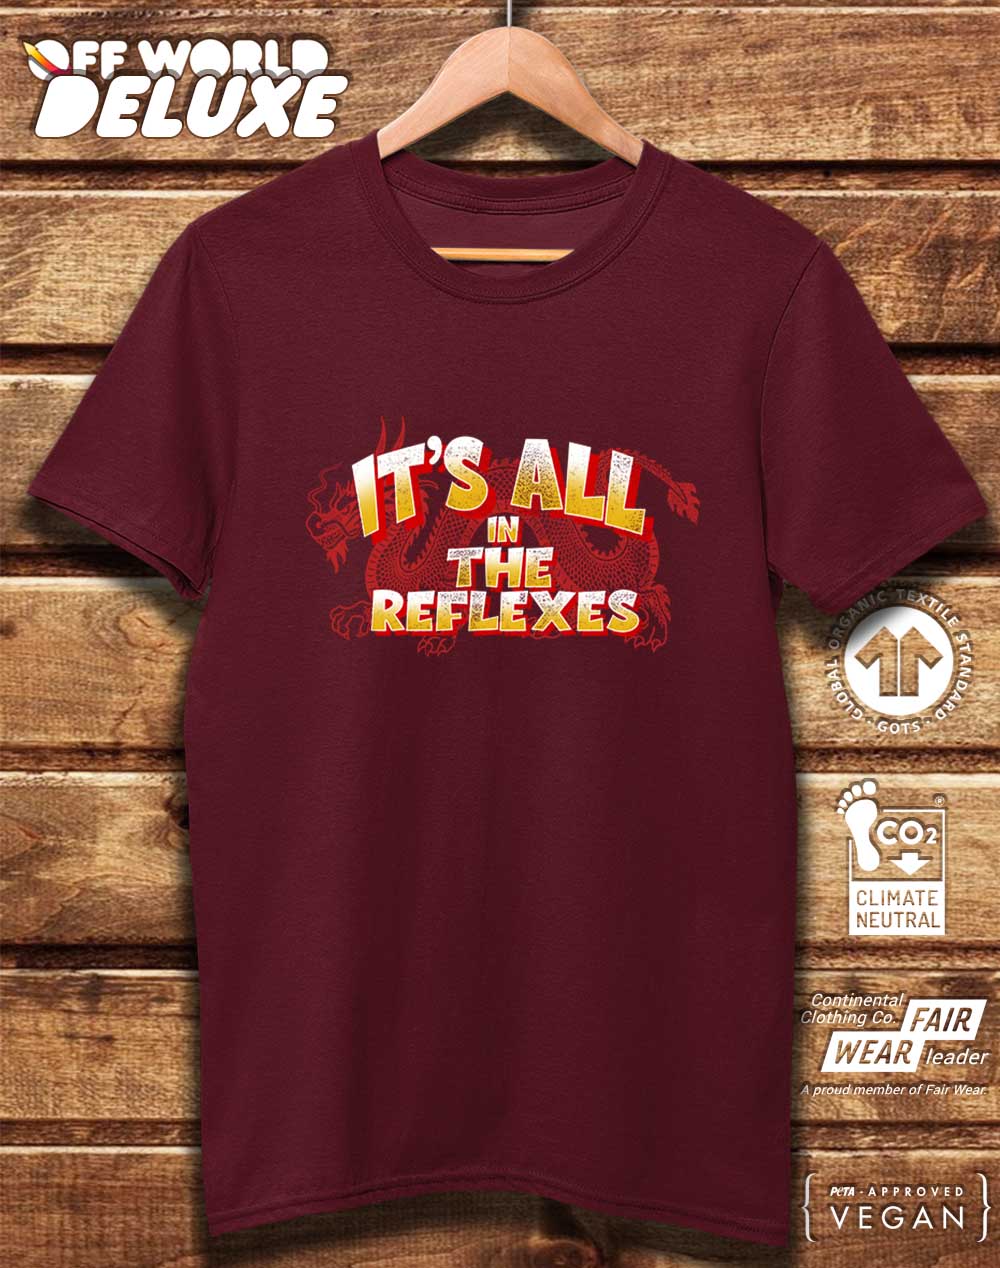 DELUXE It's All in the Reflexes Organic Cotton T-Shirt